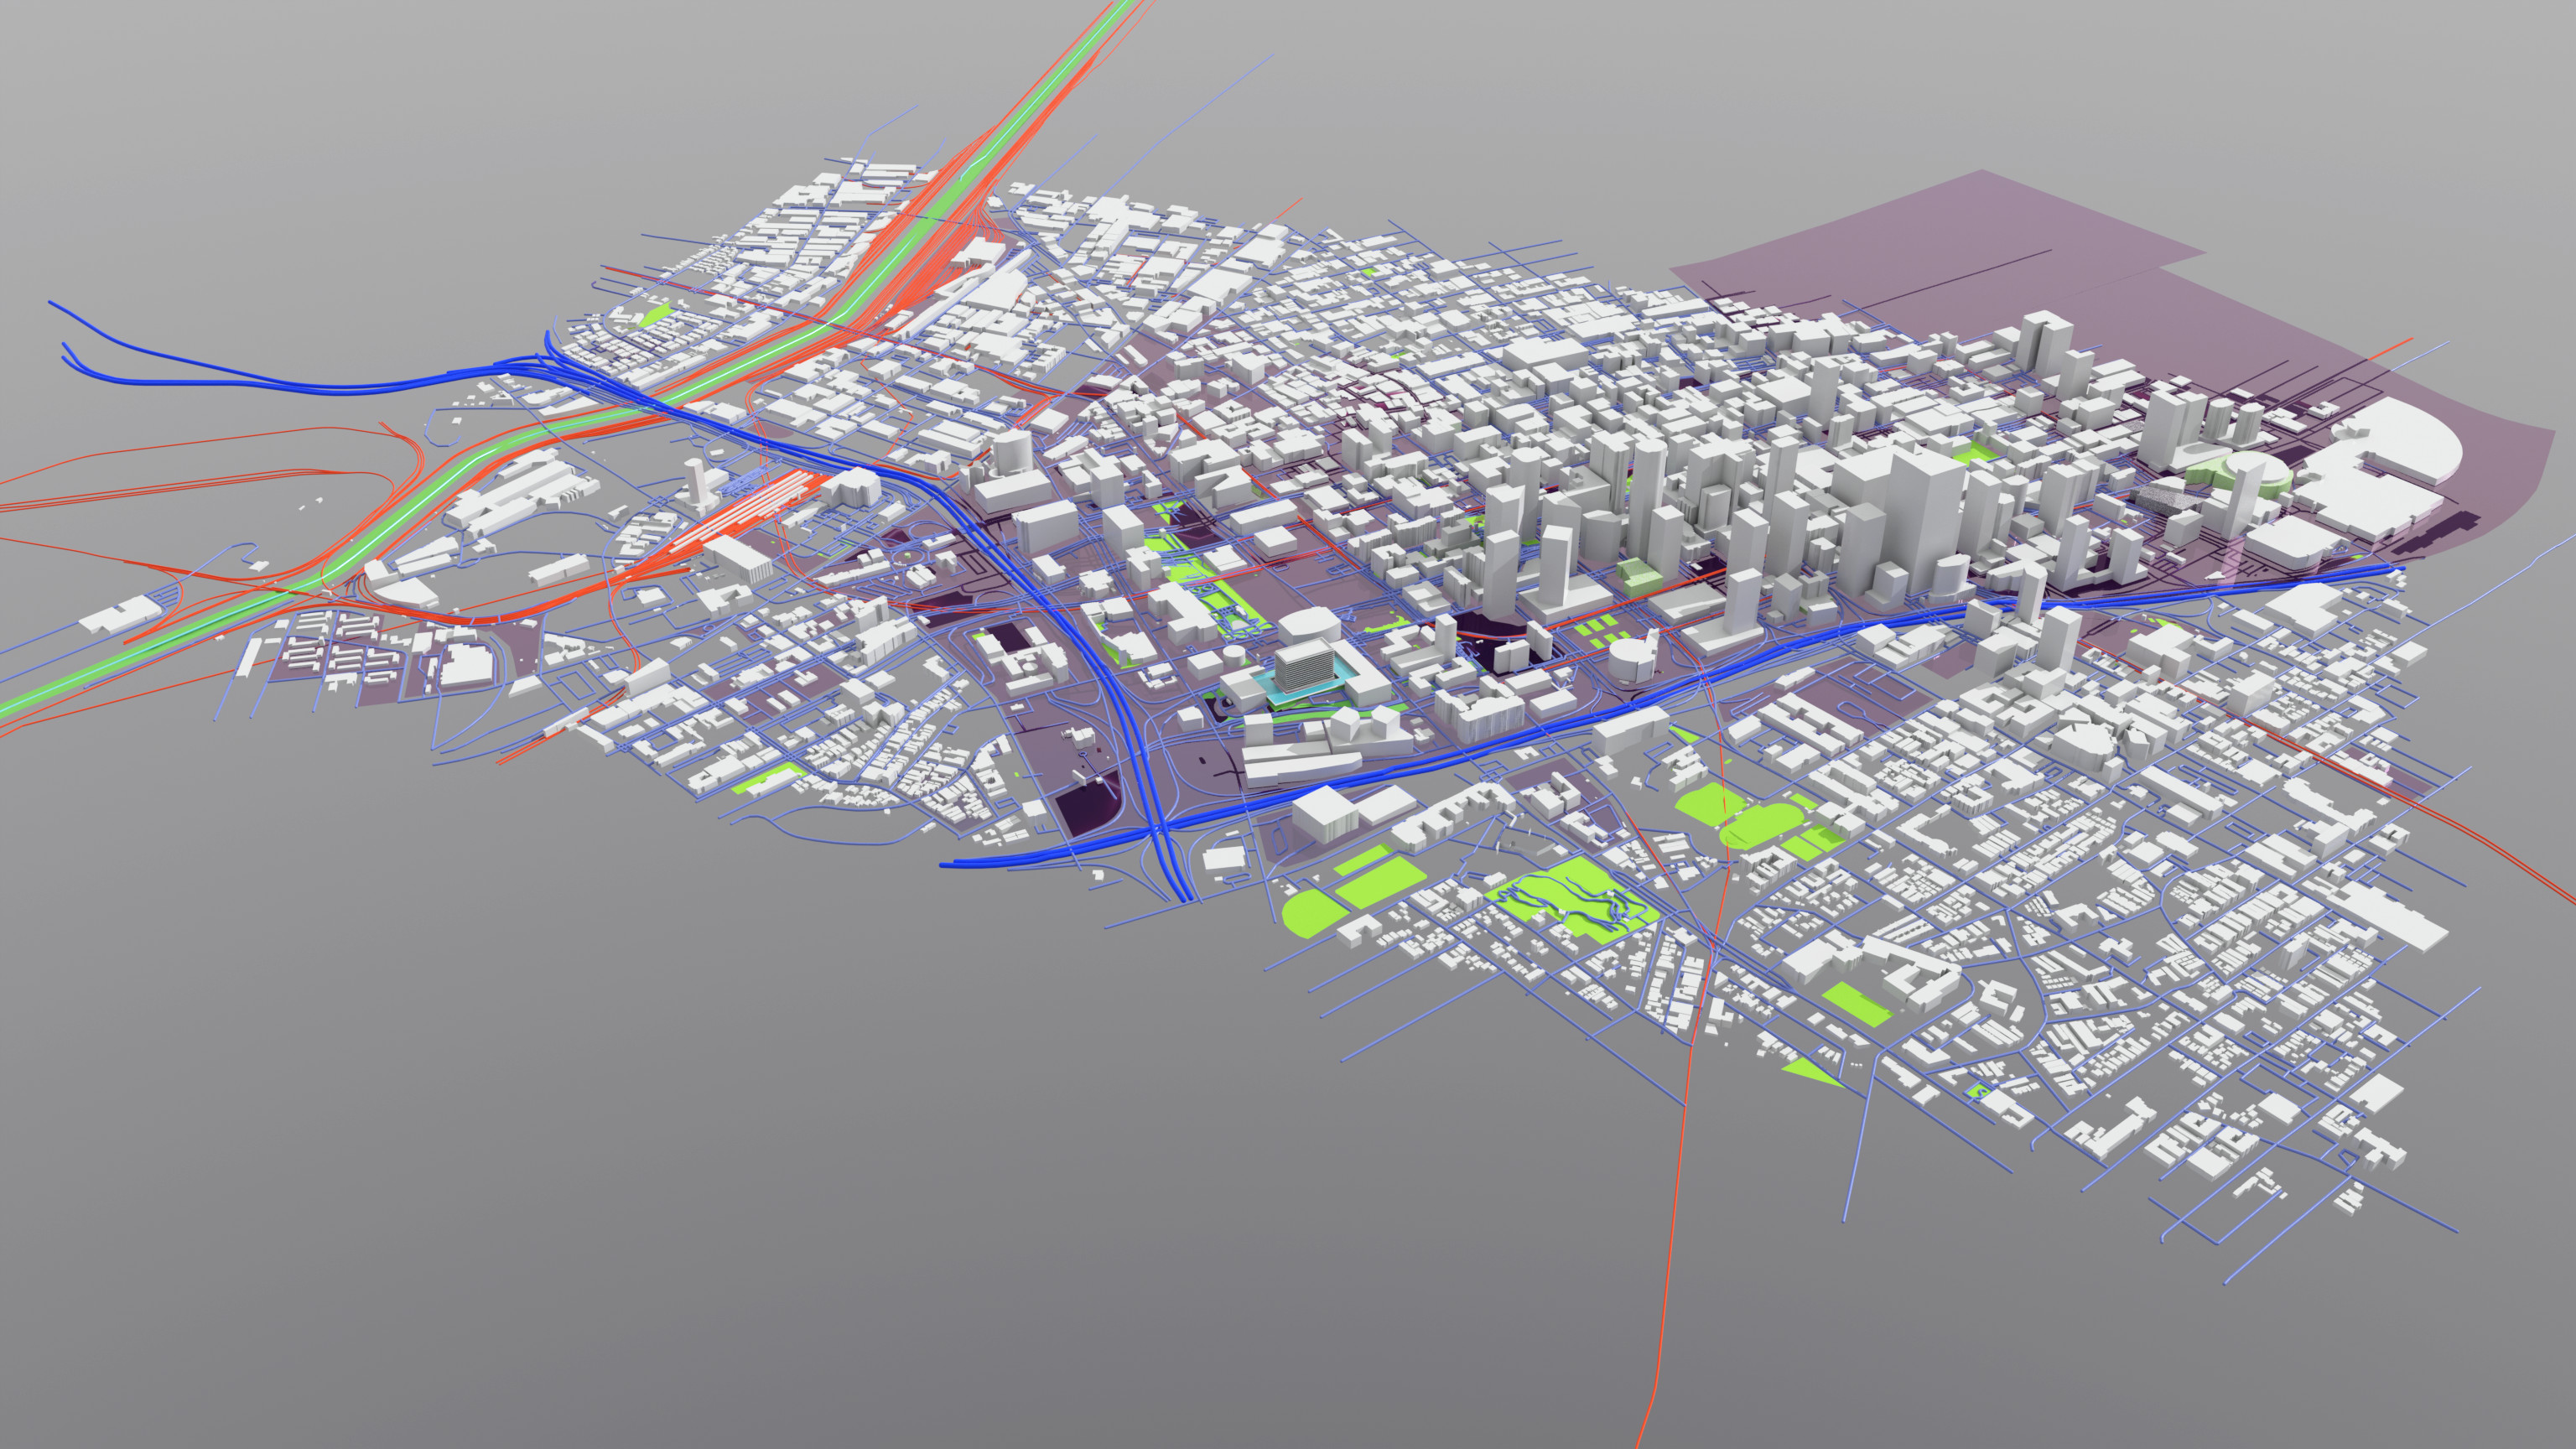 This is a perspective view of a GIS Specialist or Urban Planner's understanding of downtown Los Angeles